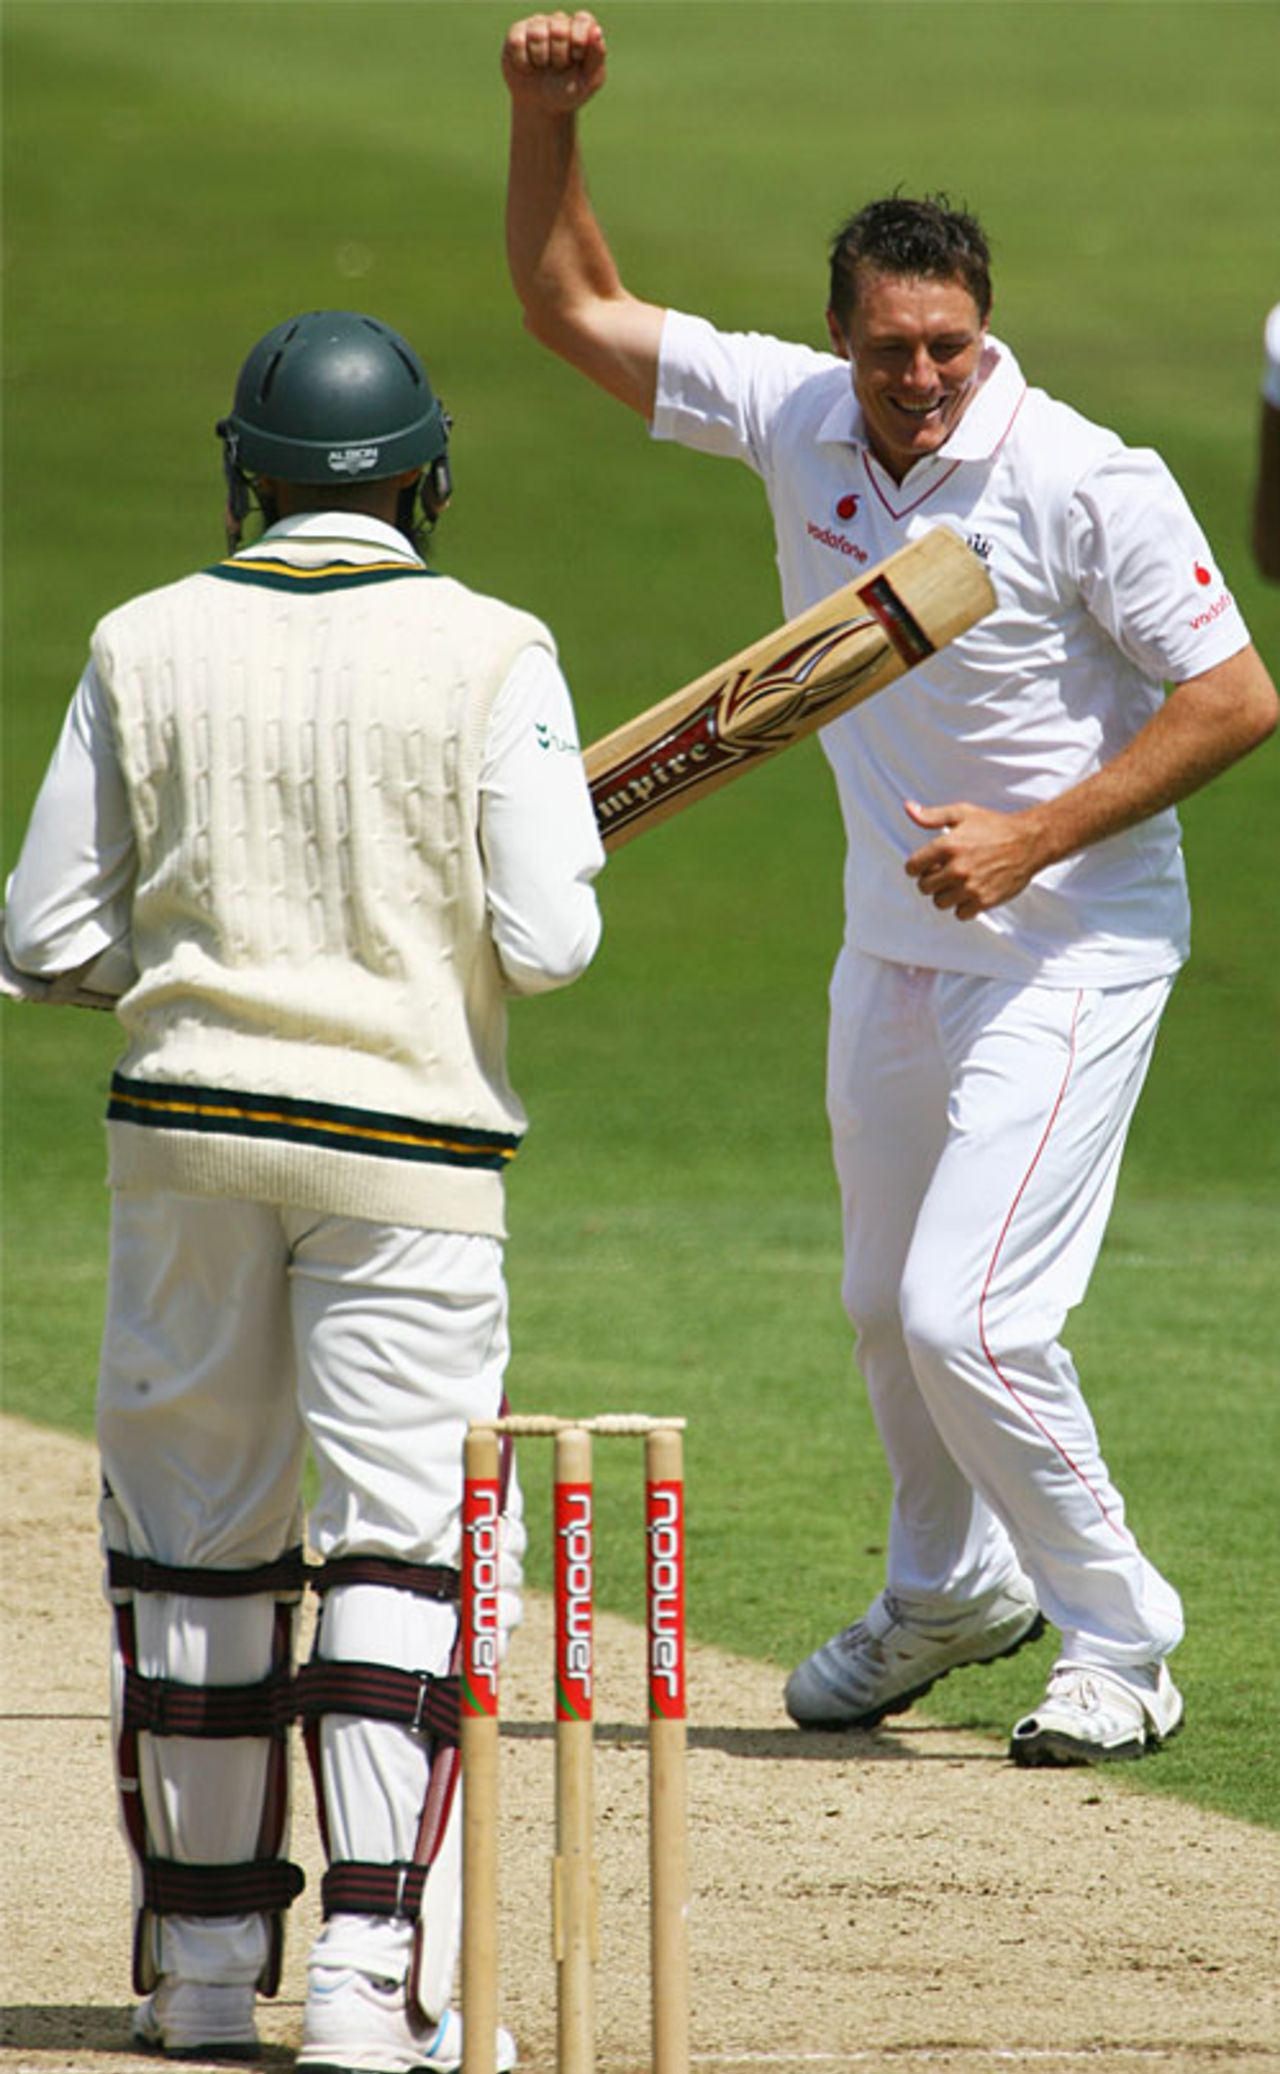 Darren Pattinson celebrates his first wicket in Tests, having trapped Hashim Amla, England v South Africa, 2nd Test, Headingley, July 19, 2008